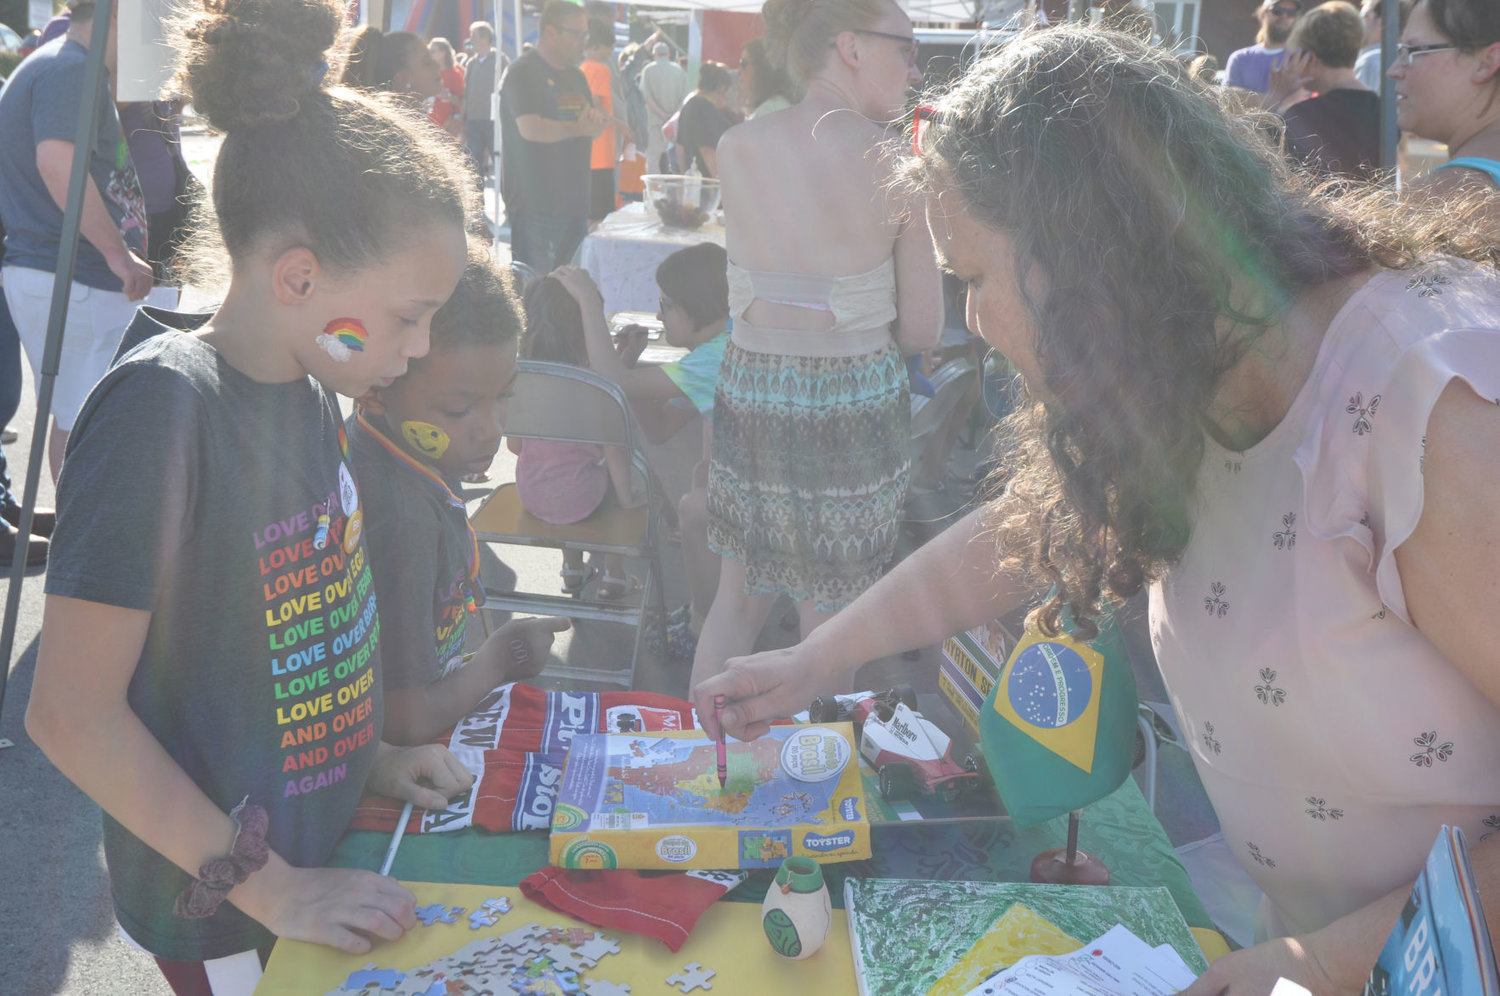 Ivette de Assis-Wilson shows a map of Brazil to Brandon and Jozy Hudson Saturday during Humans United for Equality's Celebration of Unity at Pike Place. Countries around the world were represented at the festival.